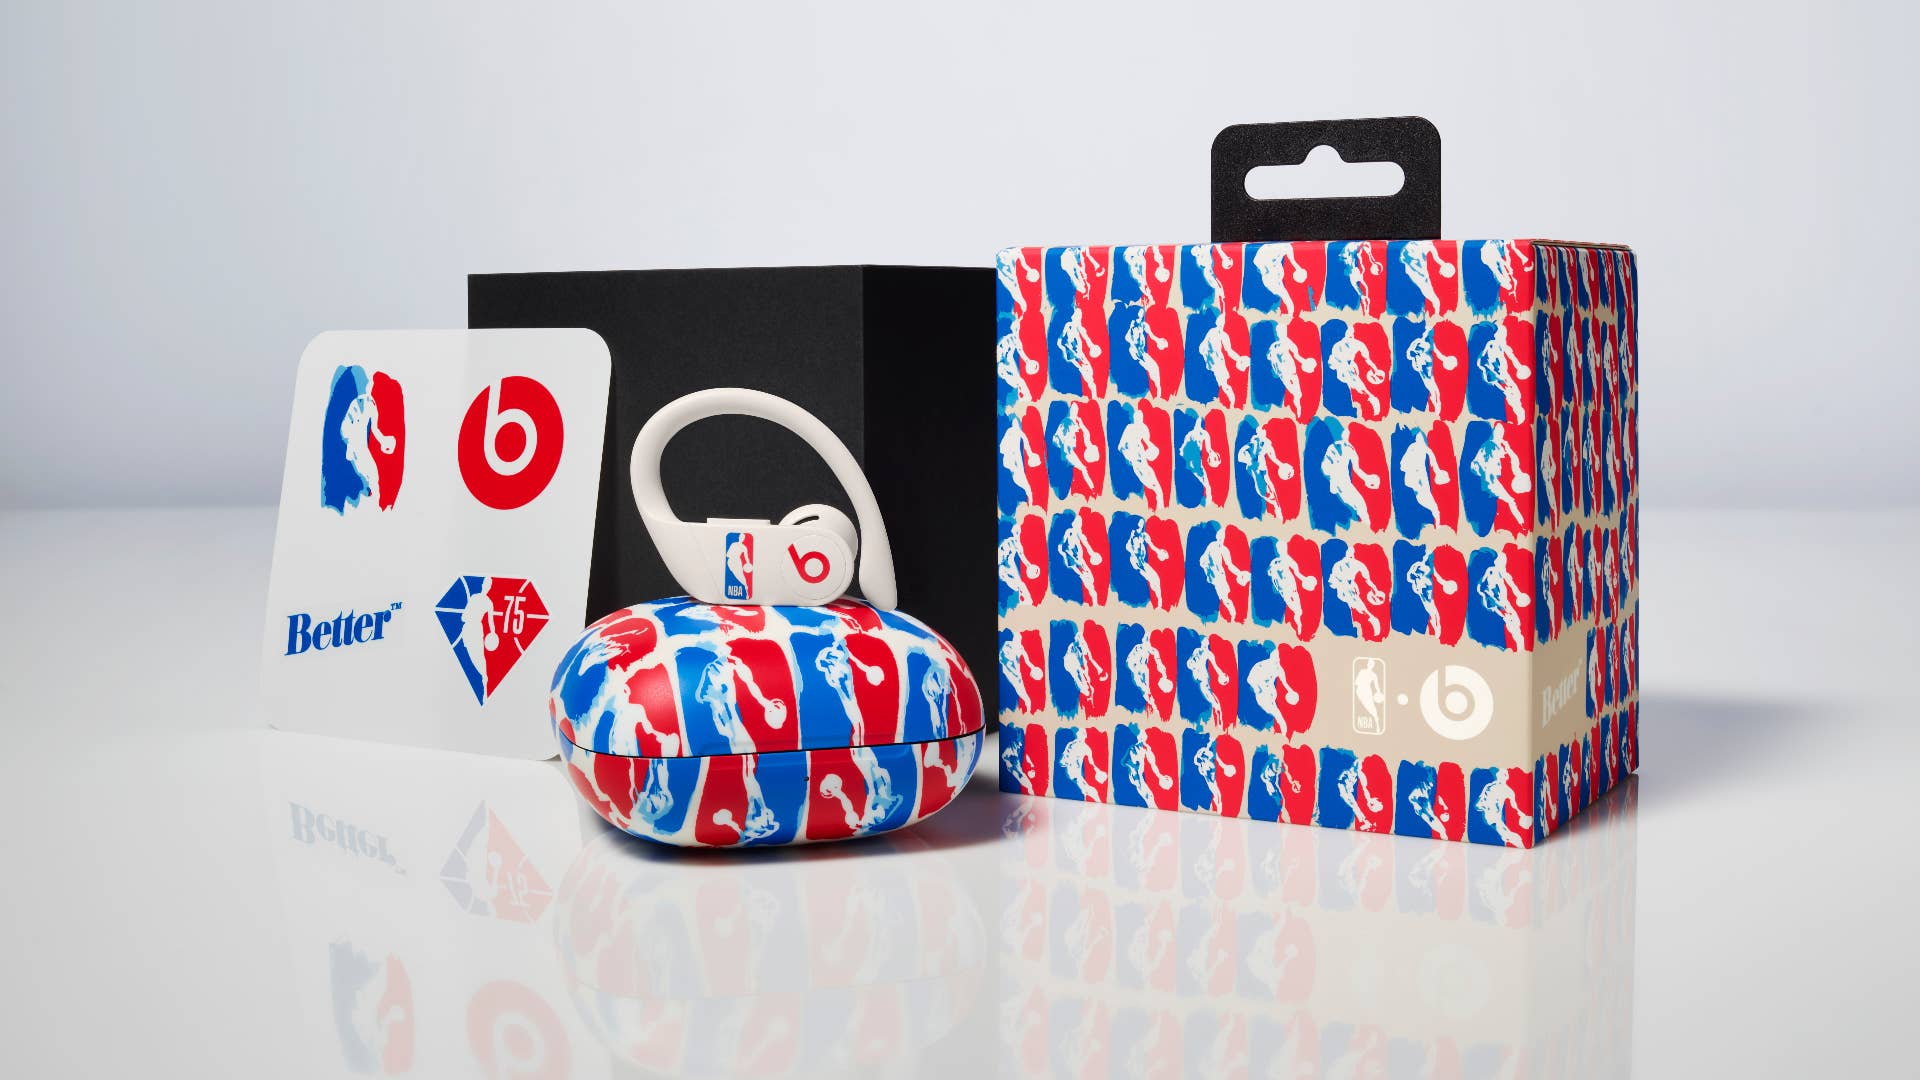 The full packaging for the NBA x Better Powerbeats Pro, featuring an abstract NBA logo in red and blue